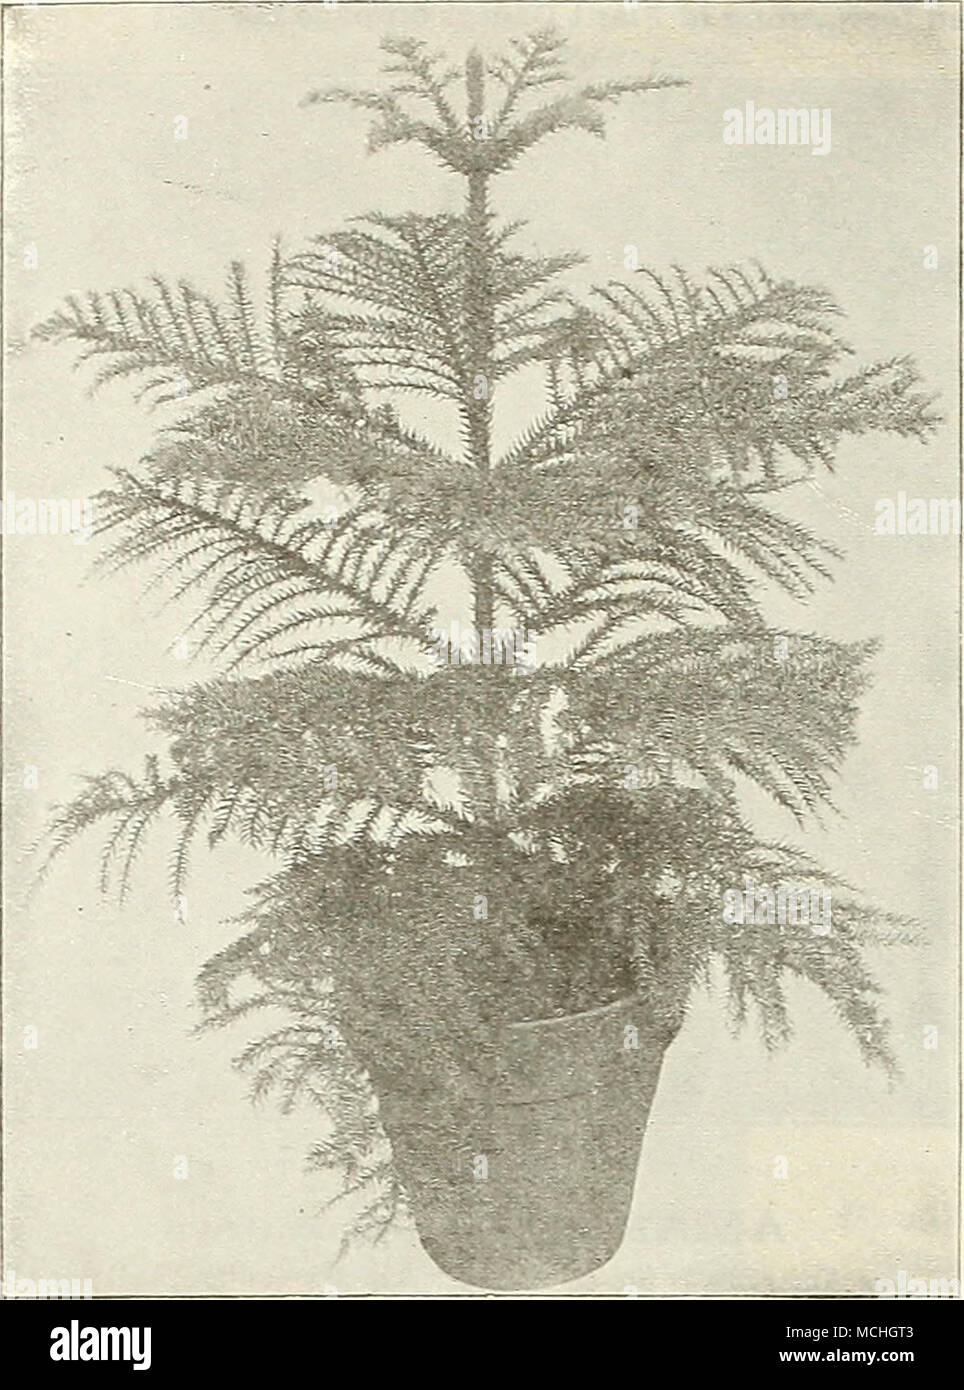 . 'Araucmua (Norfolk Island Pine) ARAUCARIA (Norfolk Island Pine) Excelsa. One of the very popular decorative piants -n-hich has been practically unobtainable since the importation of plants from foreign countries has been prohibited. We are pleased to be able to offer a limited stock of American grown plants. 4-inch pots, 6 to 7 inches high, Sl.OO each; 6-inch pots, 12 to 15 inches high, $3.00 each. ASPARAGUS Plumosus Nanus (Asparagus Fern). There is no better plant for table decoration than this. The foliage is more delicate than that of the finest Fern, being lace-like in its filminess. A p Stock Photo